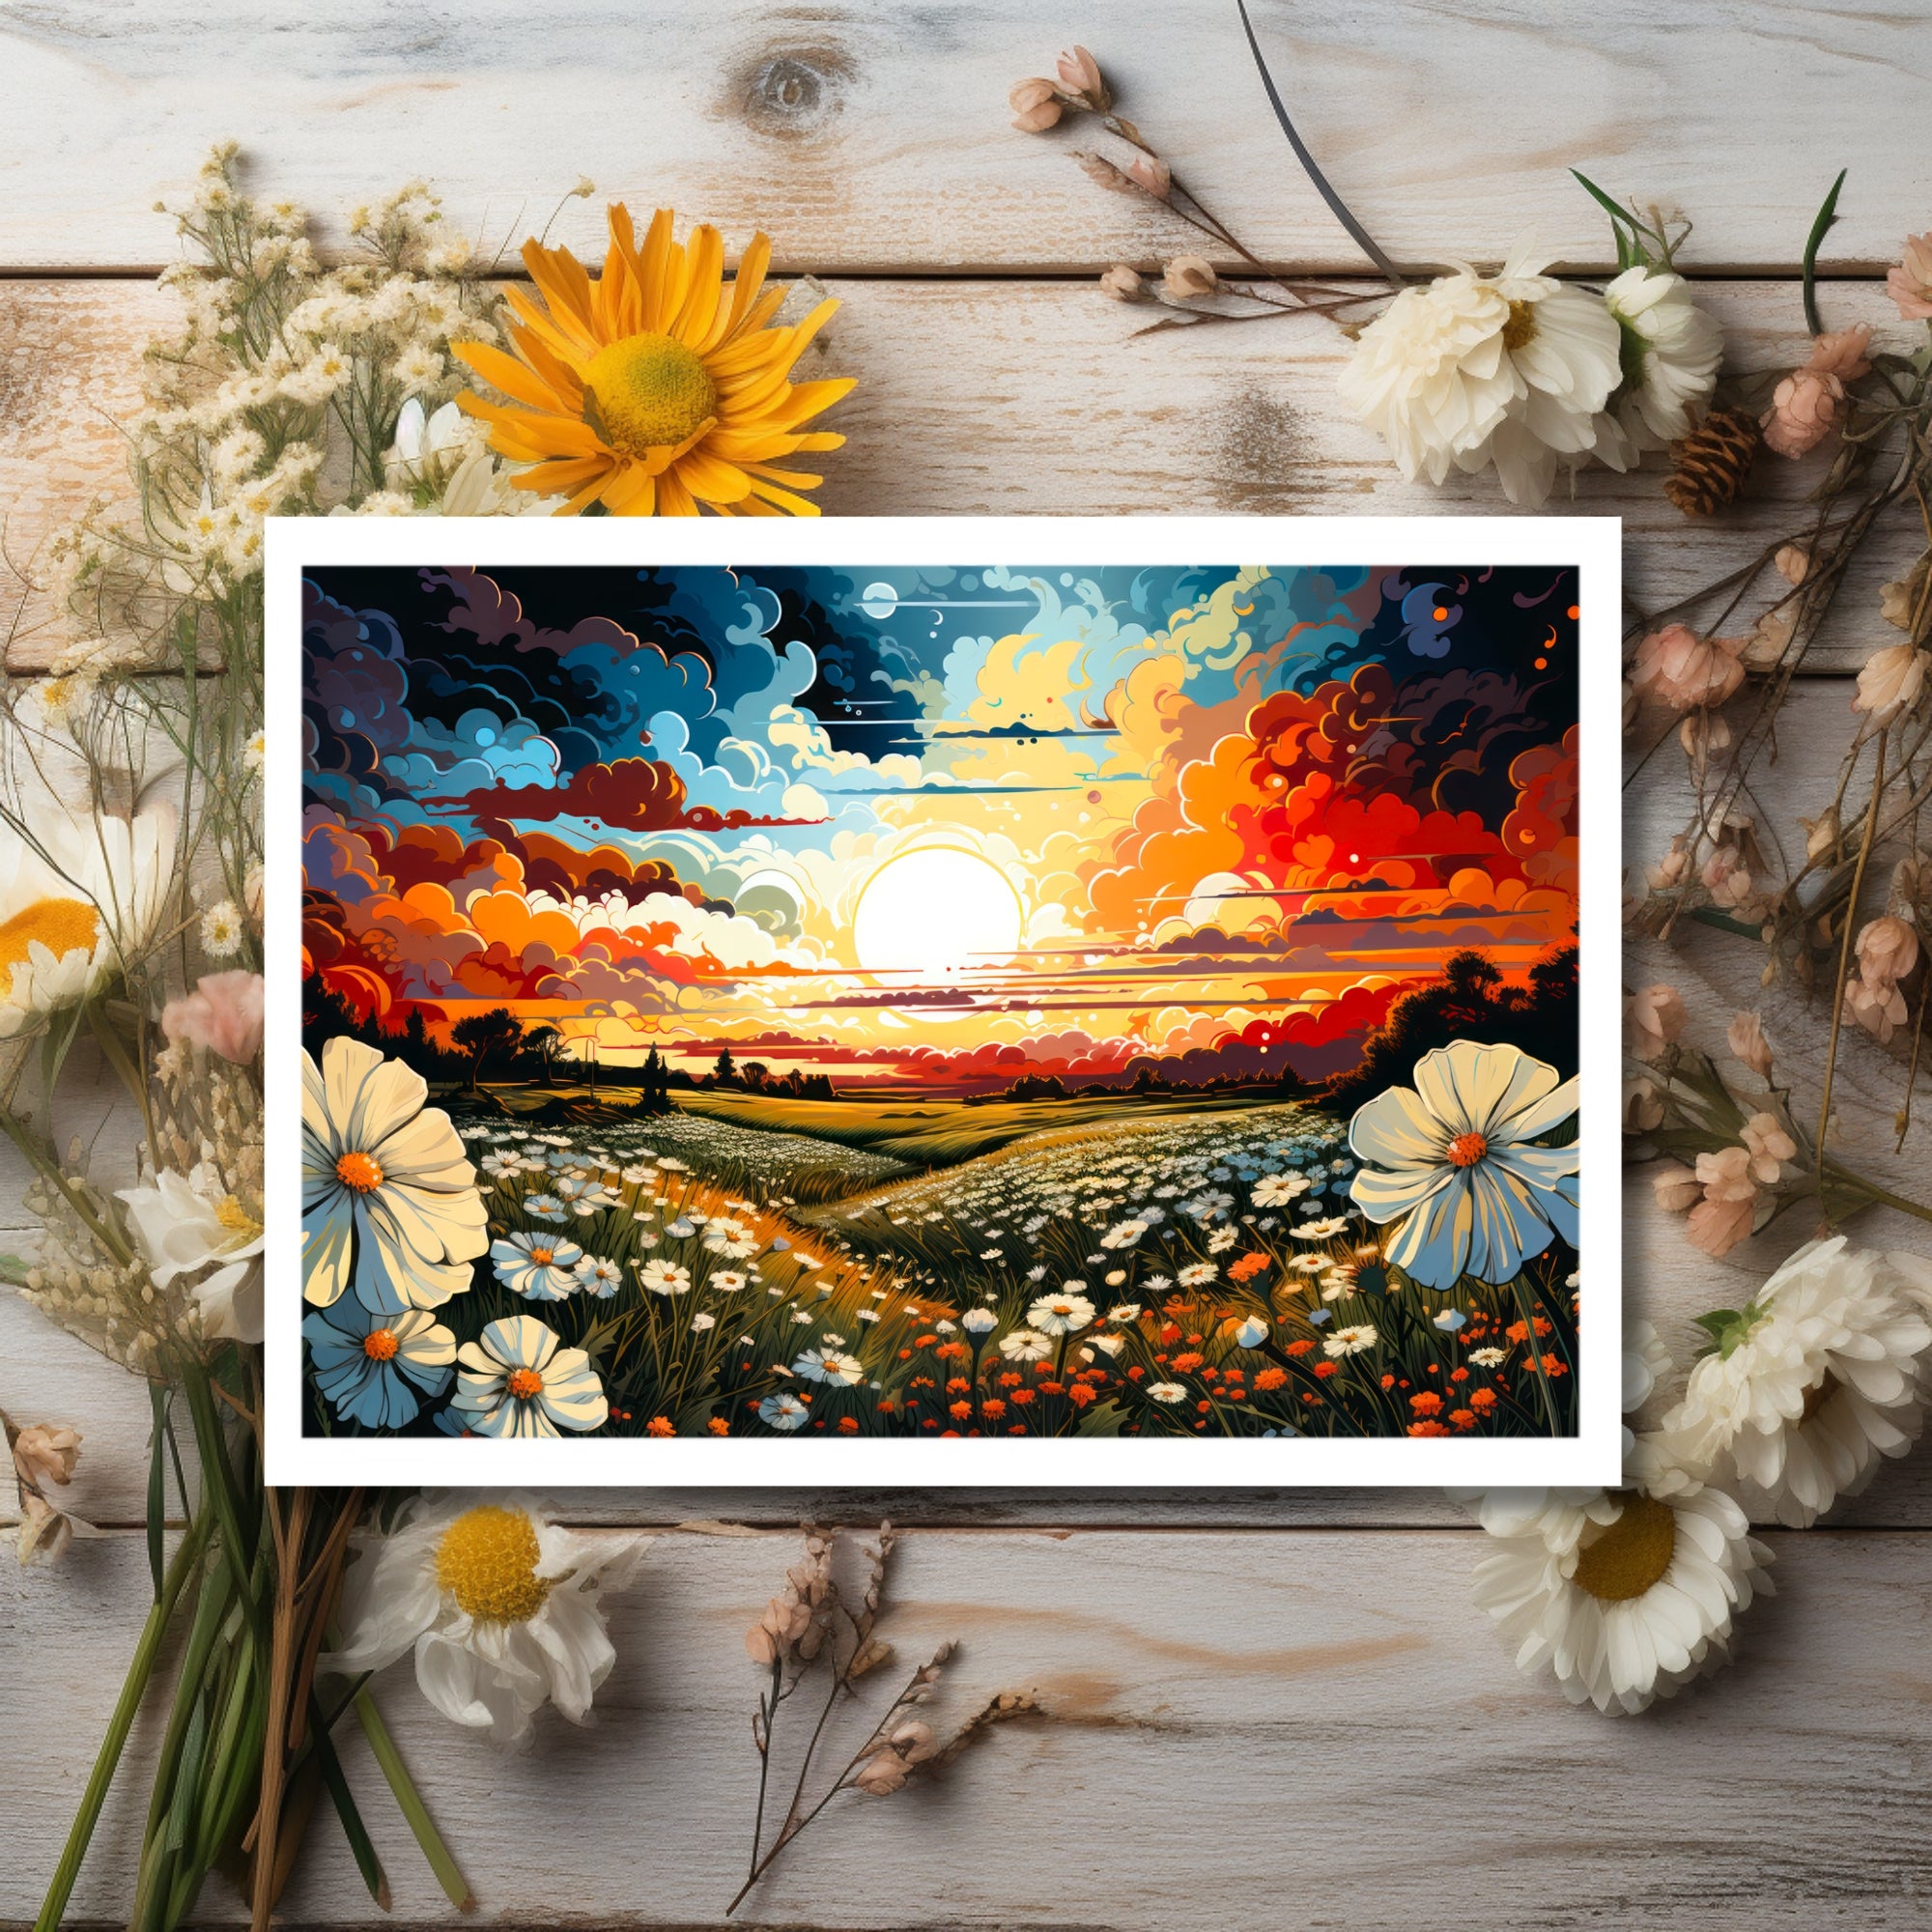 Radiant Sunrise Over Wildflower Dreams Greeting Card